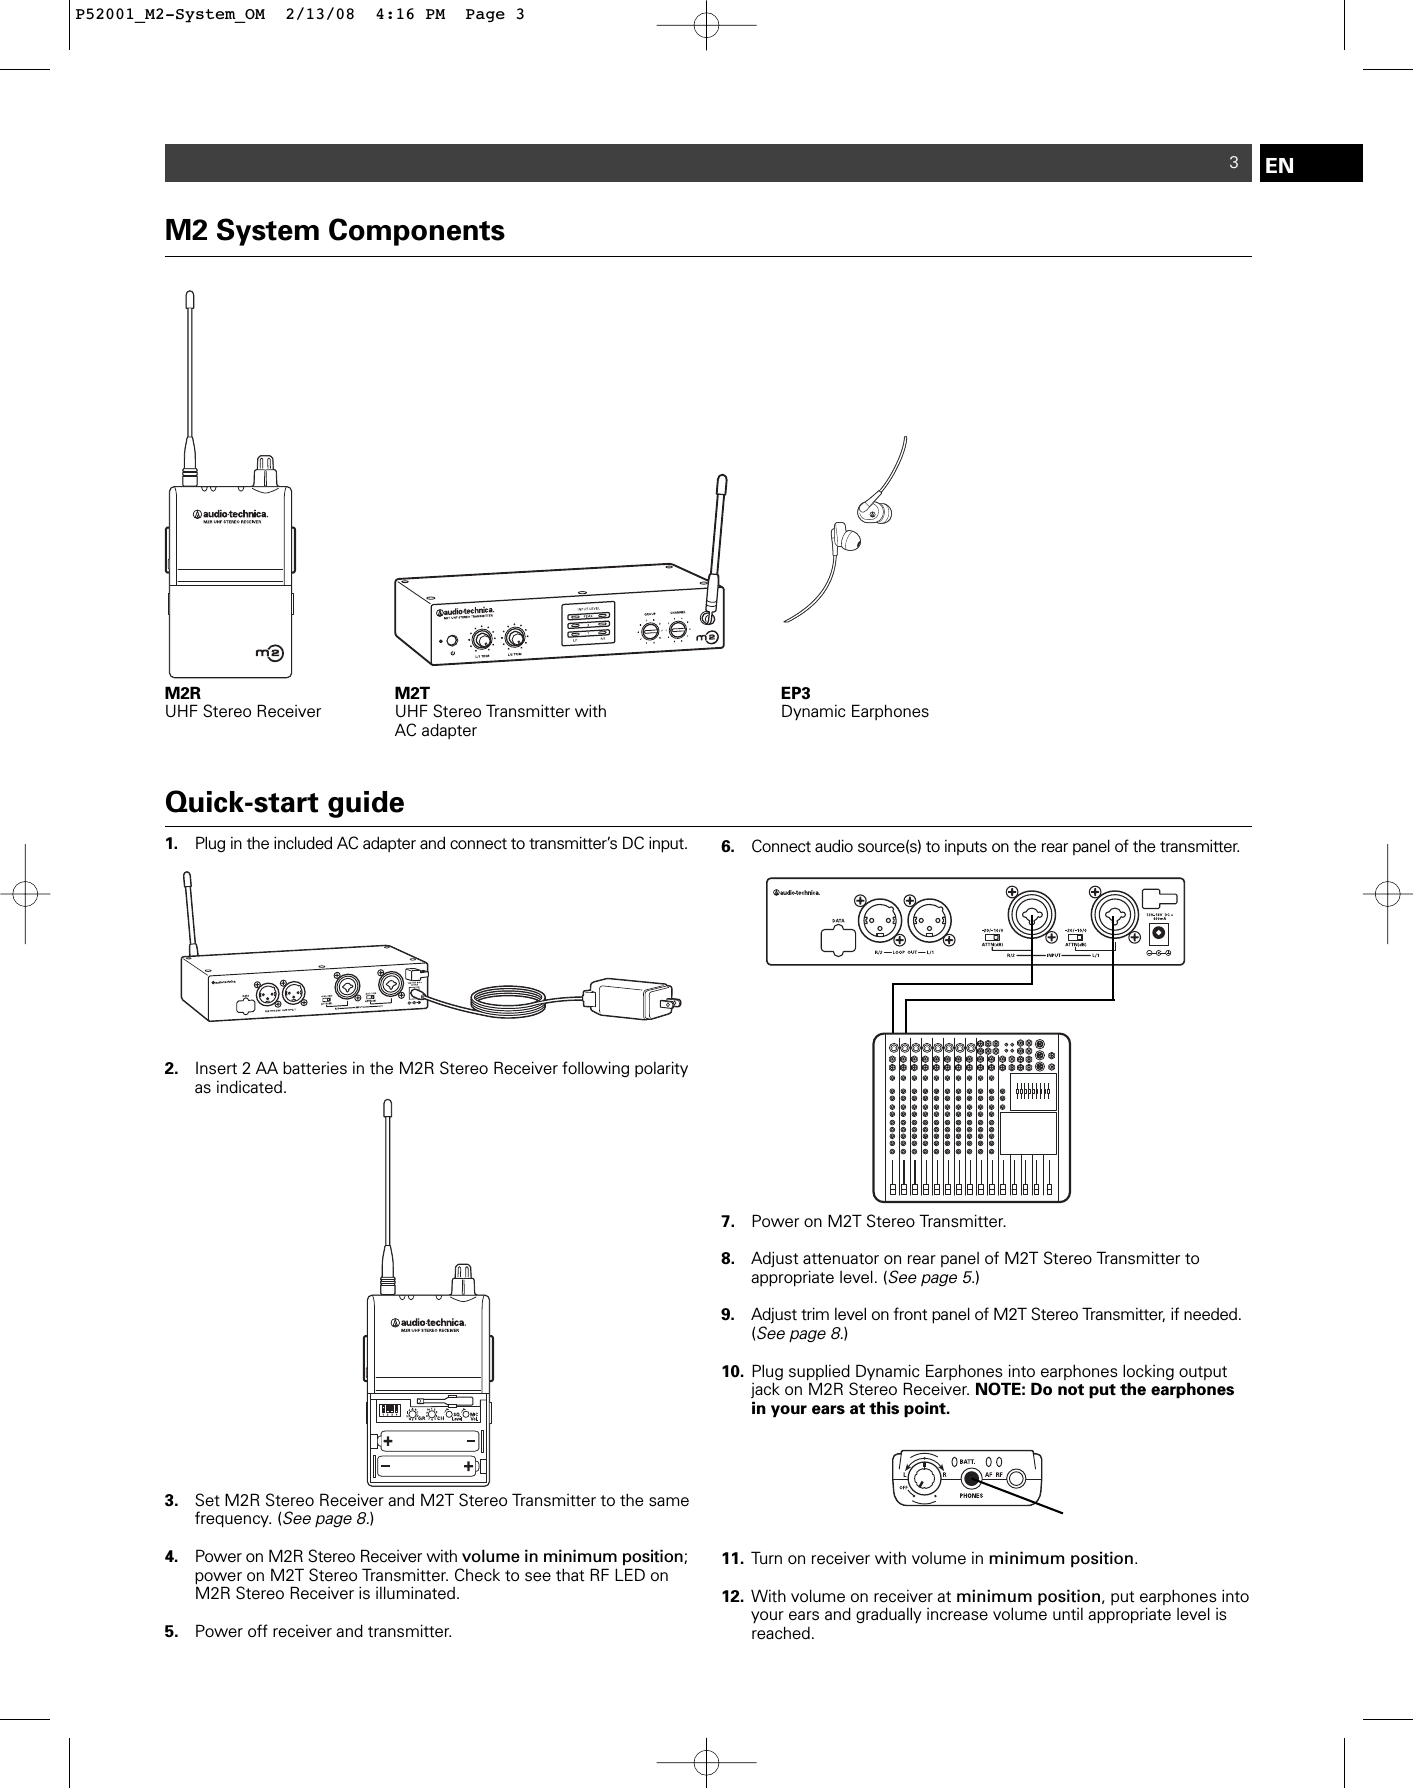 M2 System ComponentsM2R UHF Stereo Receiver M2T UHF Stereo Transmitter withAC adapterEP3Dynamic Earphones3Quick-start guide1. Plug in the included AC adapter and connect to transmitter’s DC input. 2. Insert 2 AA batteries in the M2R Stereo Receiver following polarity as indicated.3. Set M2R Stereo Receiver and M2T Stereo Transmitter to the same frequency. (See page 8.)4. Power on M2R Stereo Receiver with volume in minimum position; power on M2T Stereo Transmitter. Check to see that RF LED on M2R Stereo Receiver is illuminated.5. Power off receiver and transmitter.6. Connect audio source(s) to inputs on the rear panel of the transmitter. 7. Power on M2T Stereo Transmitter.8. Adjust attenuator on rear panel of M2T Stereo Transmitter to appropriate level. (See page 5.)9. Adjust trim level on front panel of M2T Stereo Transmitter, if needed.(See page 8.)10. Plug supplied Dynamic Earphones into earphones locking output jack on M2R Stereo Receiver. NOTE: Do not put the earphones in your ears at this point.11. Turn on receiver with volume in minimum position.12. With volume on receiver at minimum position, put earphones into your ears and gradually increase volume until appropriate level is reached.ENP52001_M2-System_OM  2/13/08  4:16 PM  Page 3